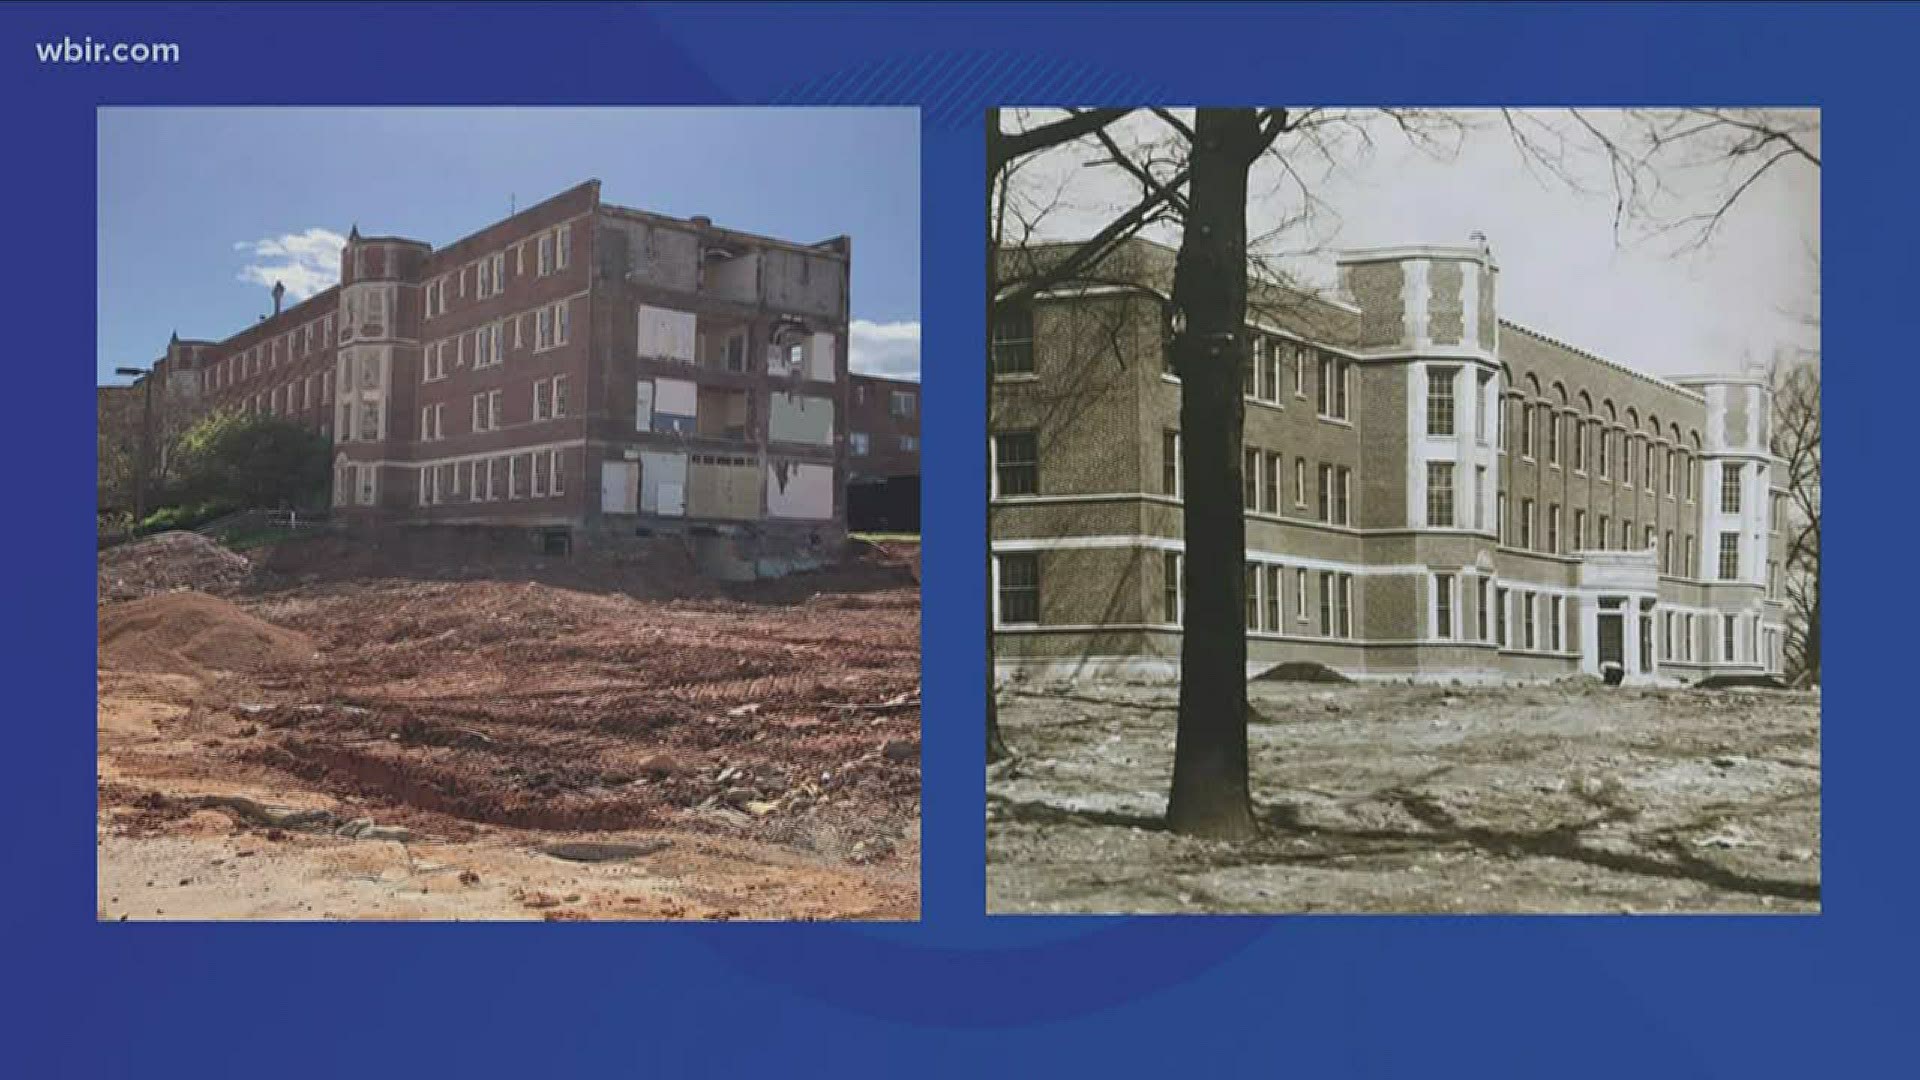 Demolition continues at the old physician's regional hospital site, revealing some pieces of the past.